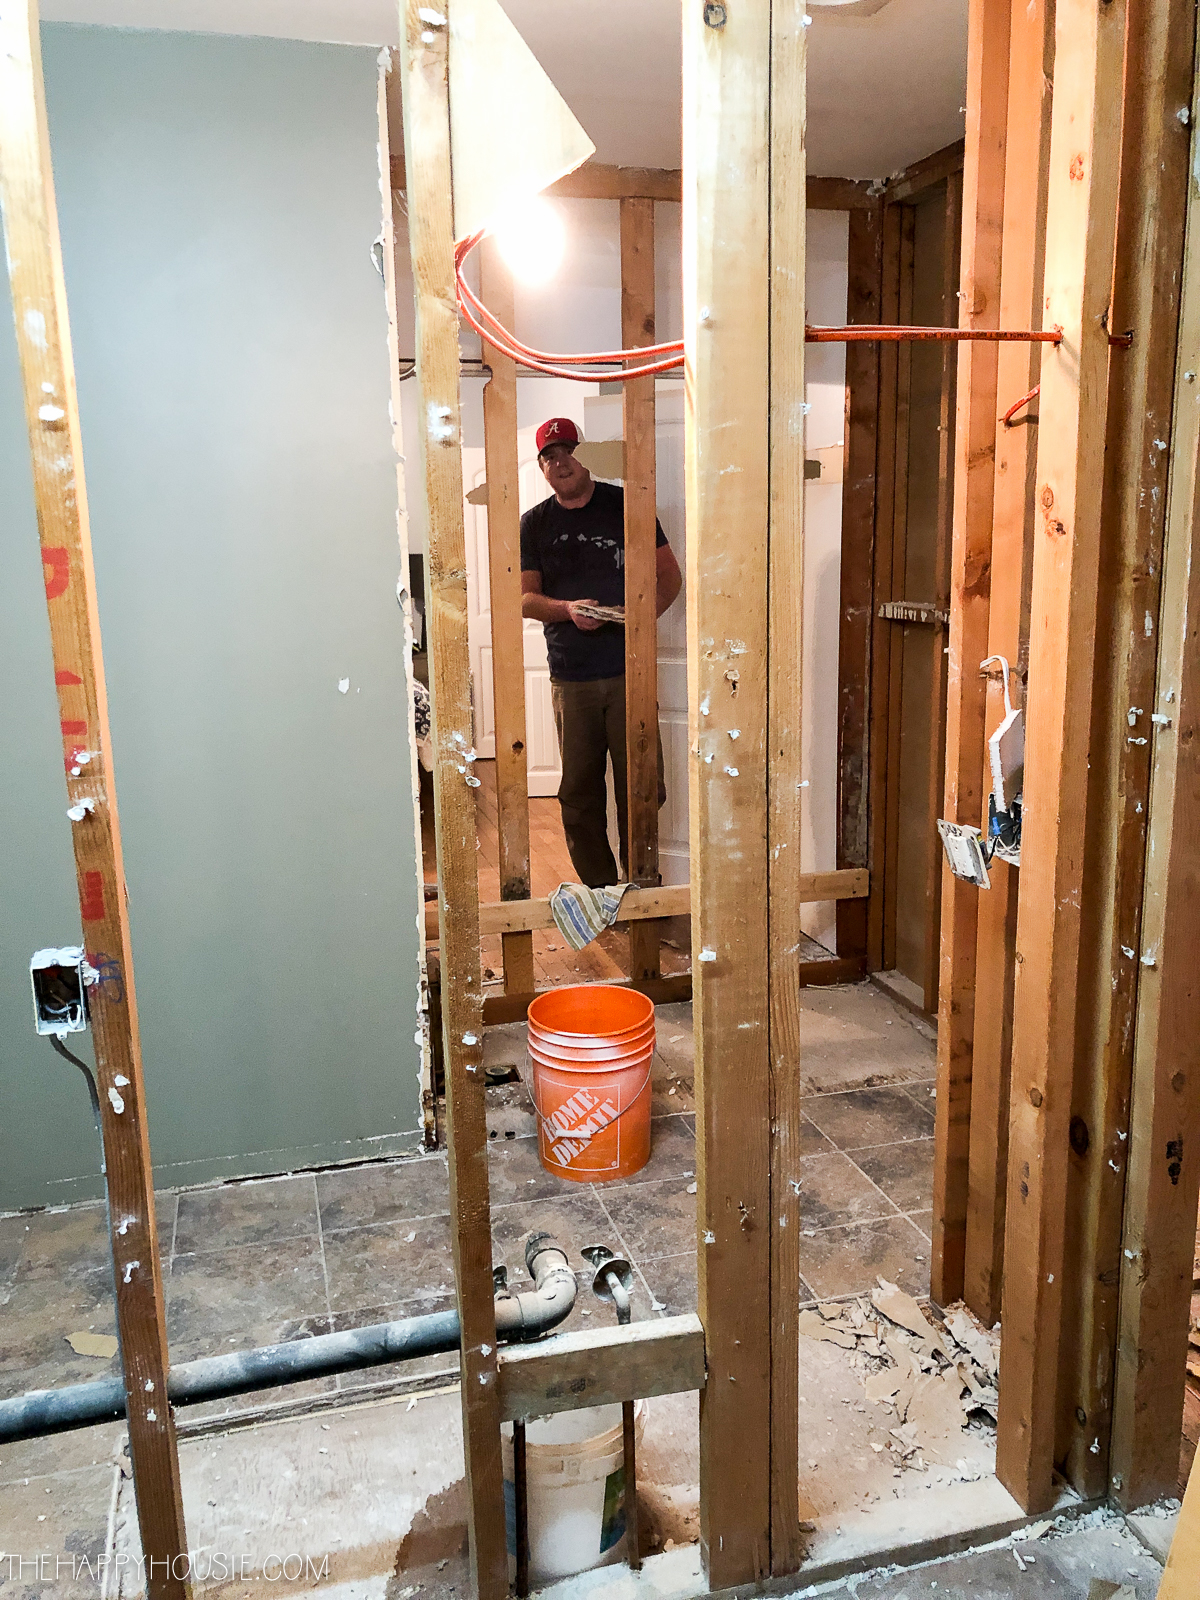 A look at the renovation from the bathroom into the bedroom.